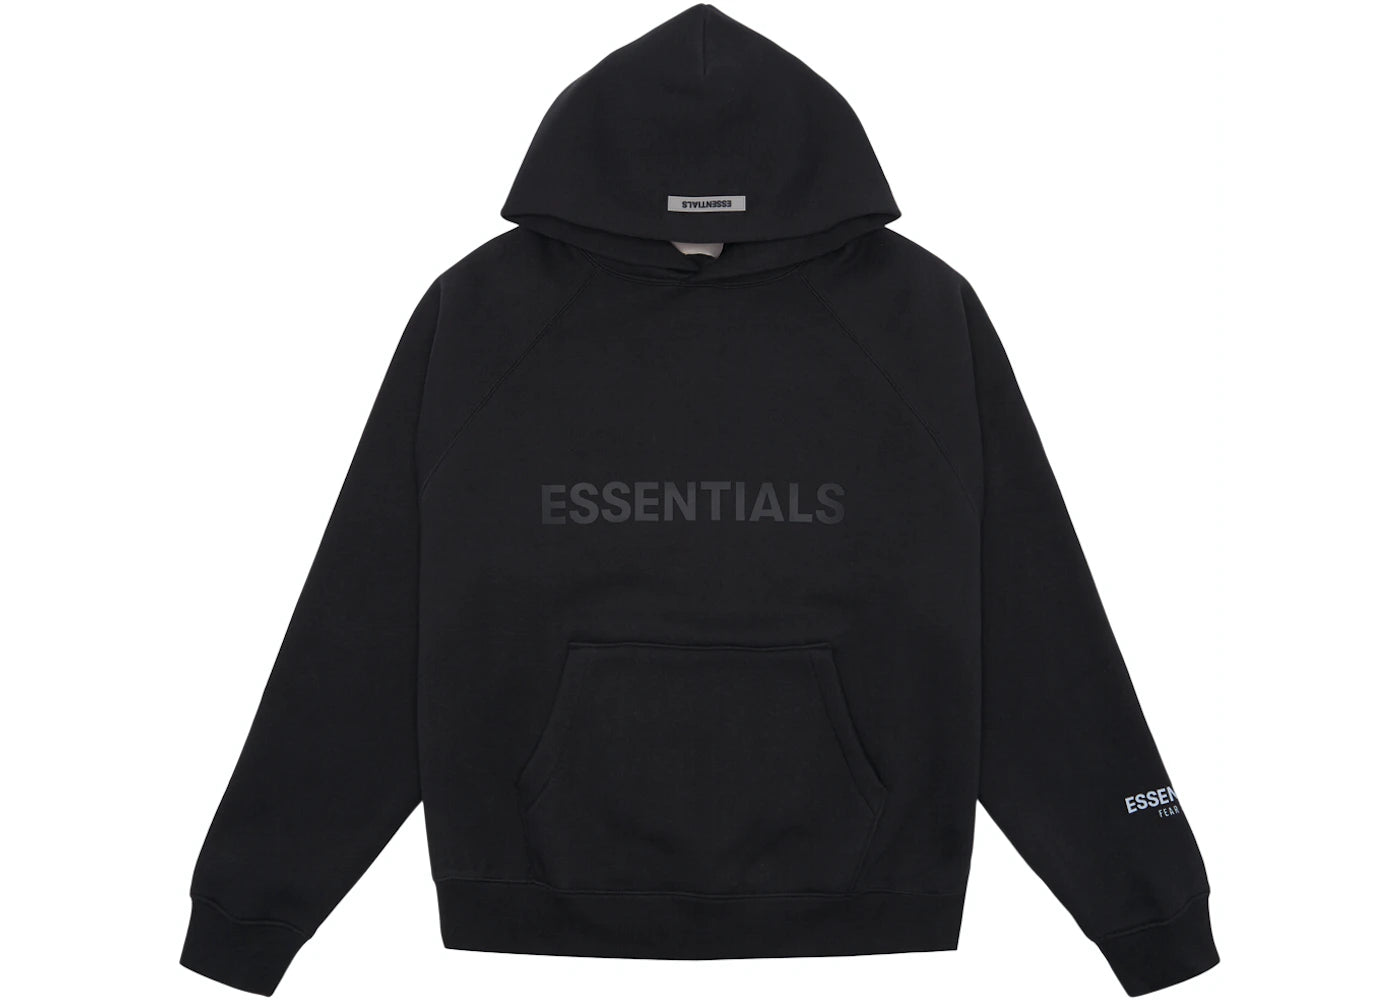 ESSENTIALS FEAR OF GOD HOODIE FRONT BLACK (FW20)